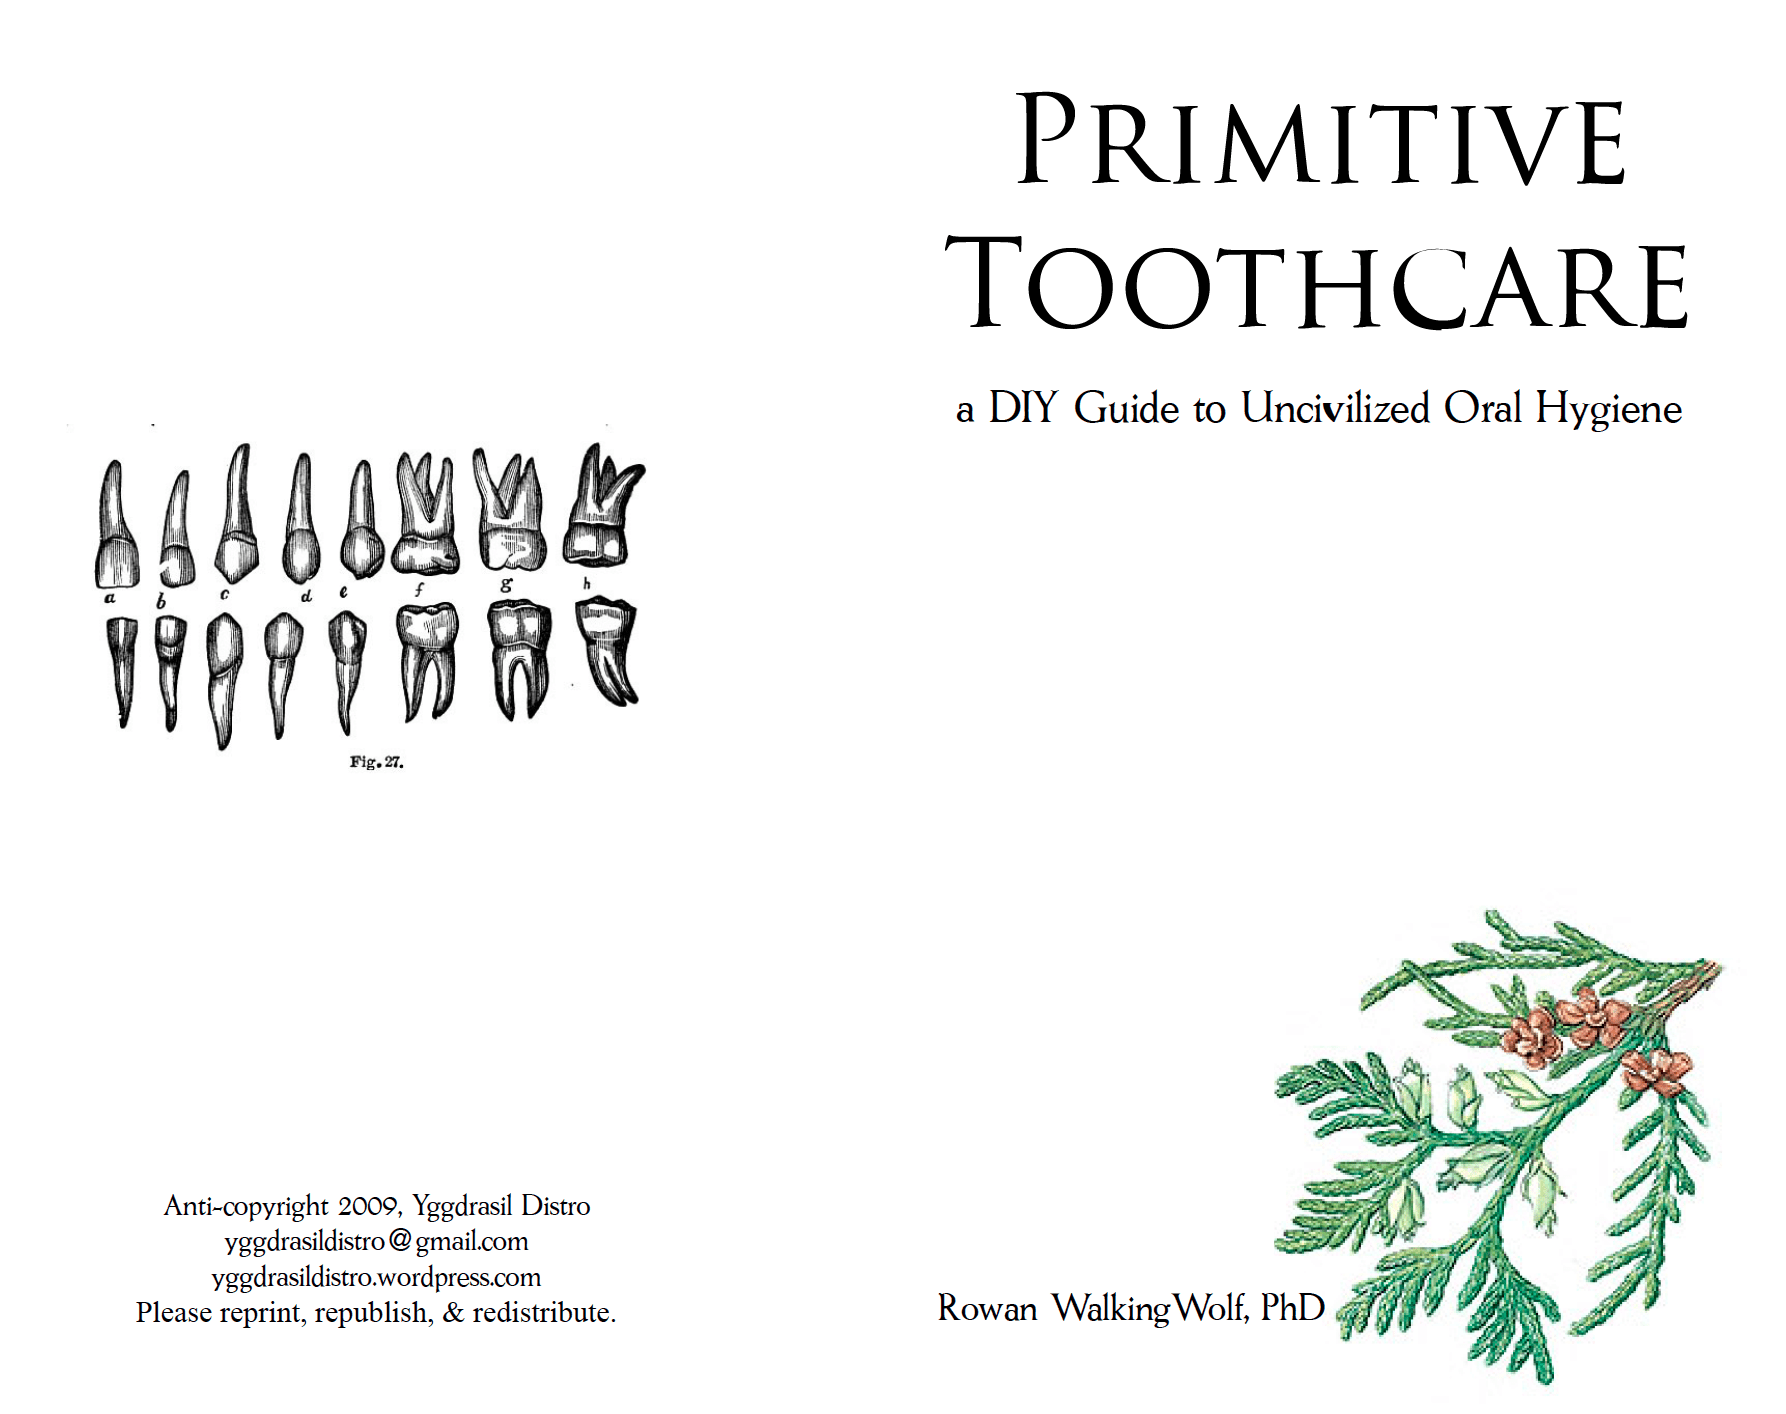 Primative Toothcare